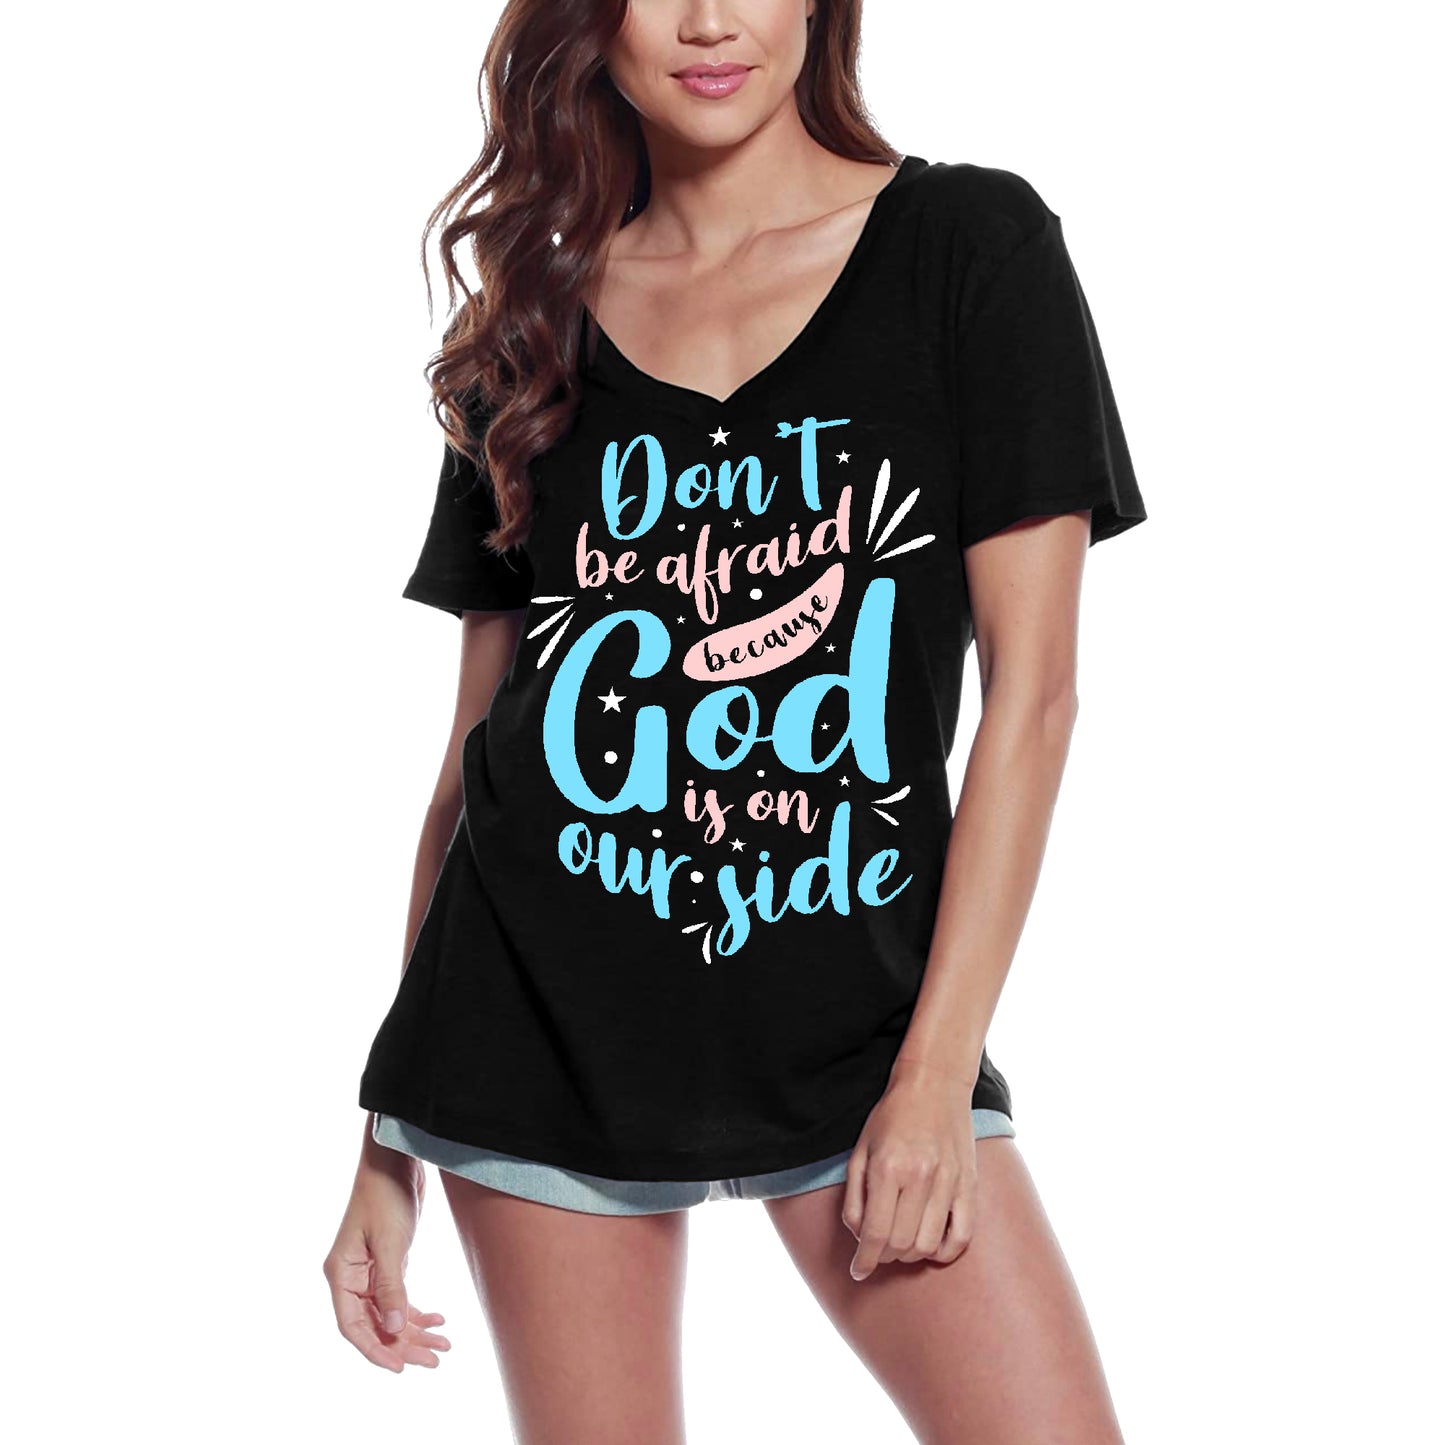 ULTRABASIC Women's T-Shirt God Is On Your Side - Motivational Quote - Vintage